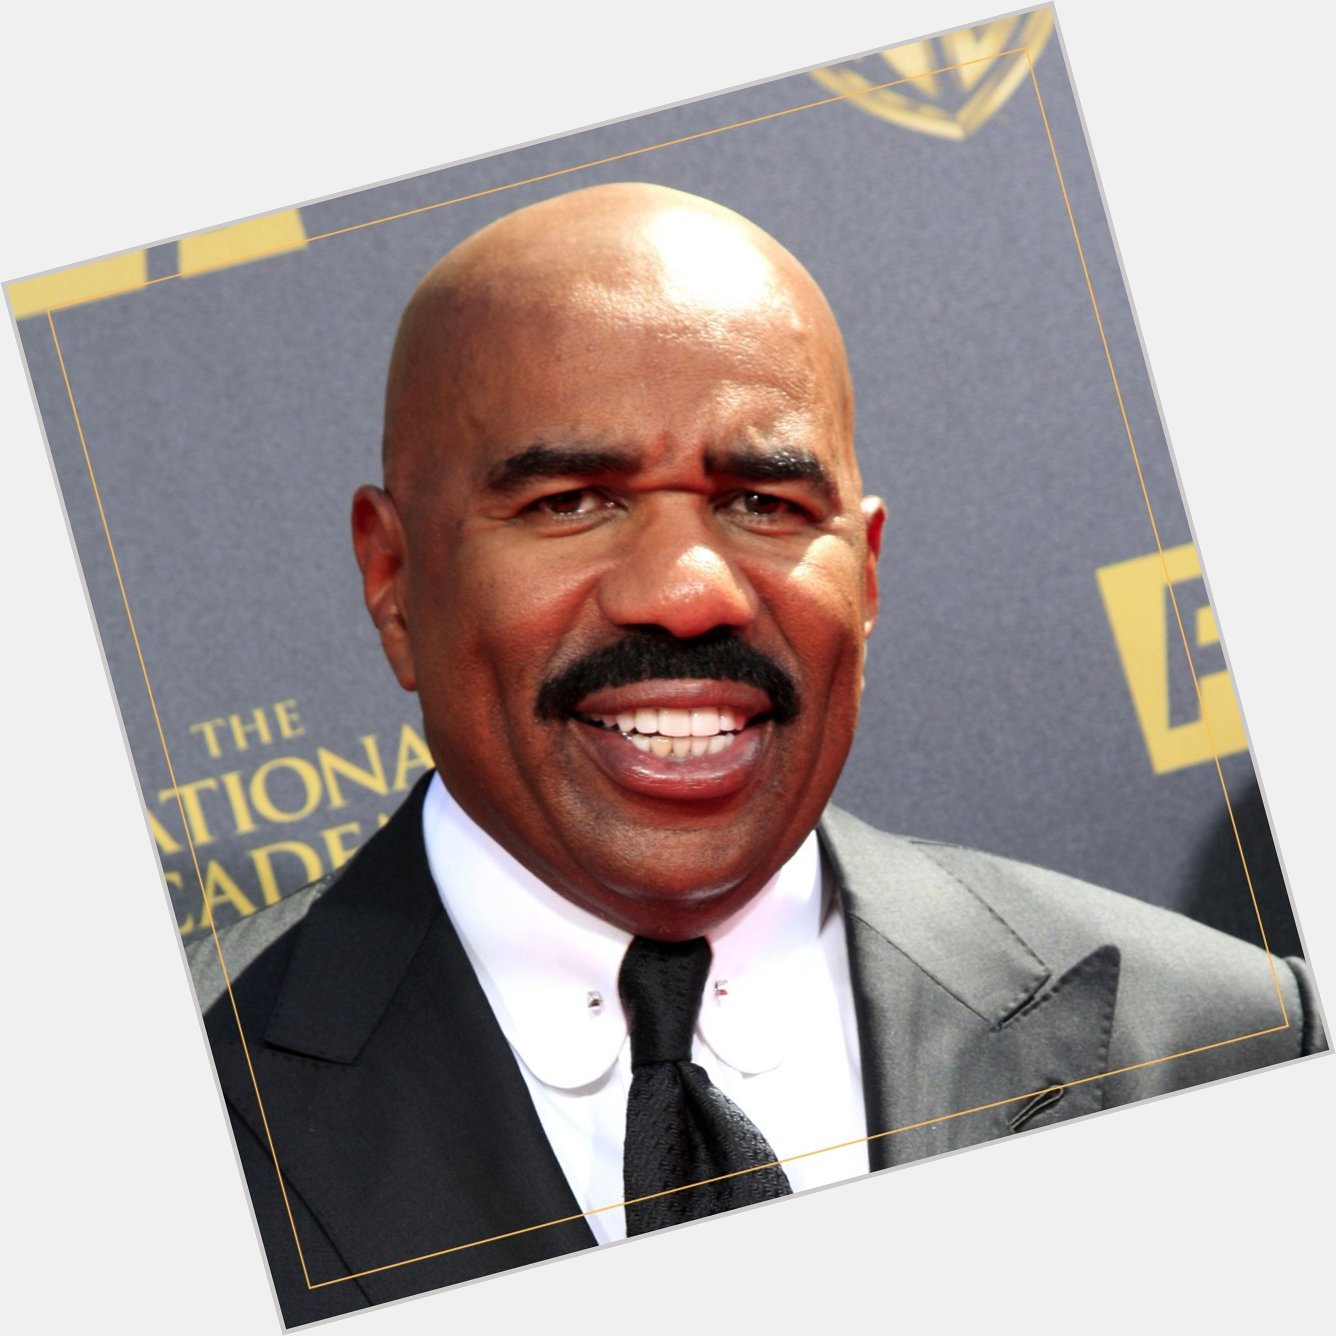 Happy birthday, Steve Harvey! The Family Feud host, producer, actor, and comedian turns 66 today. 